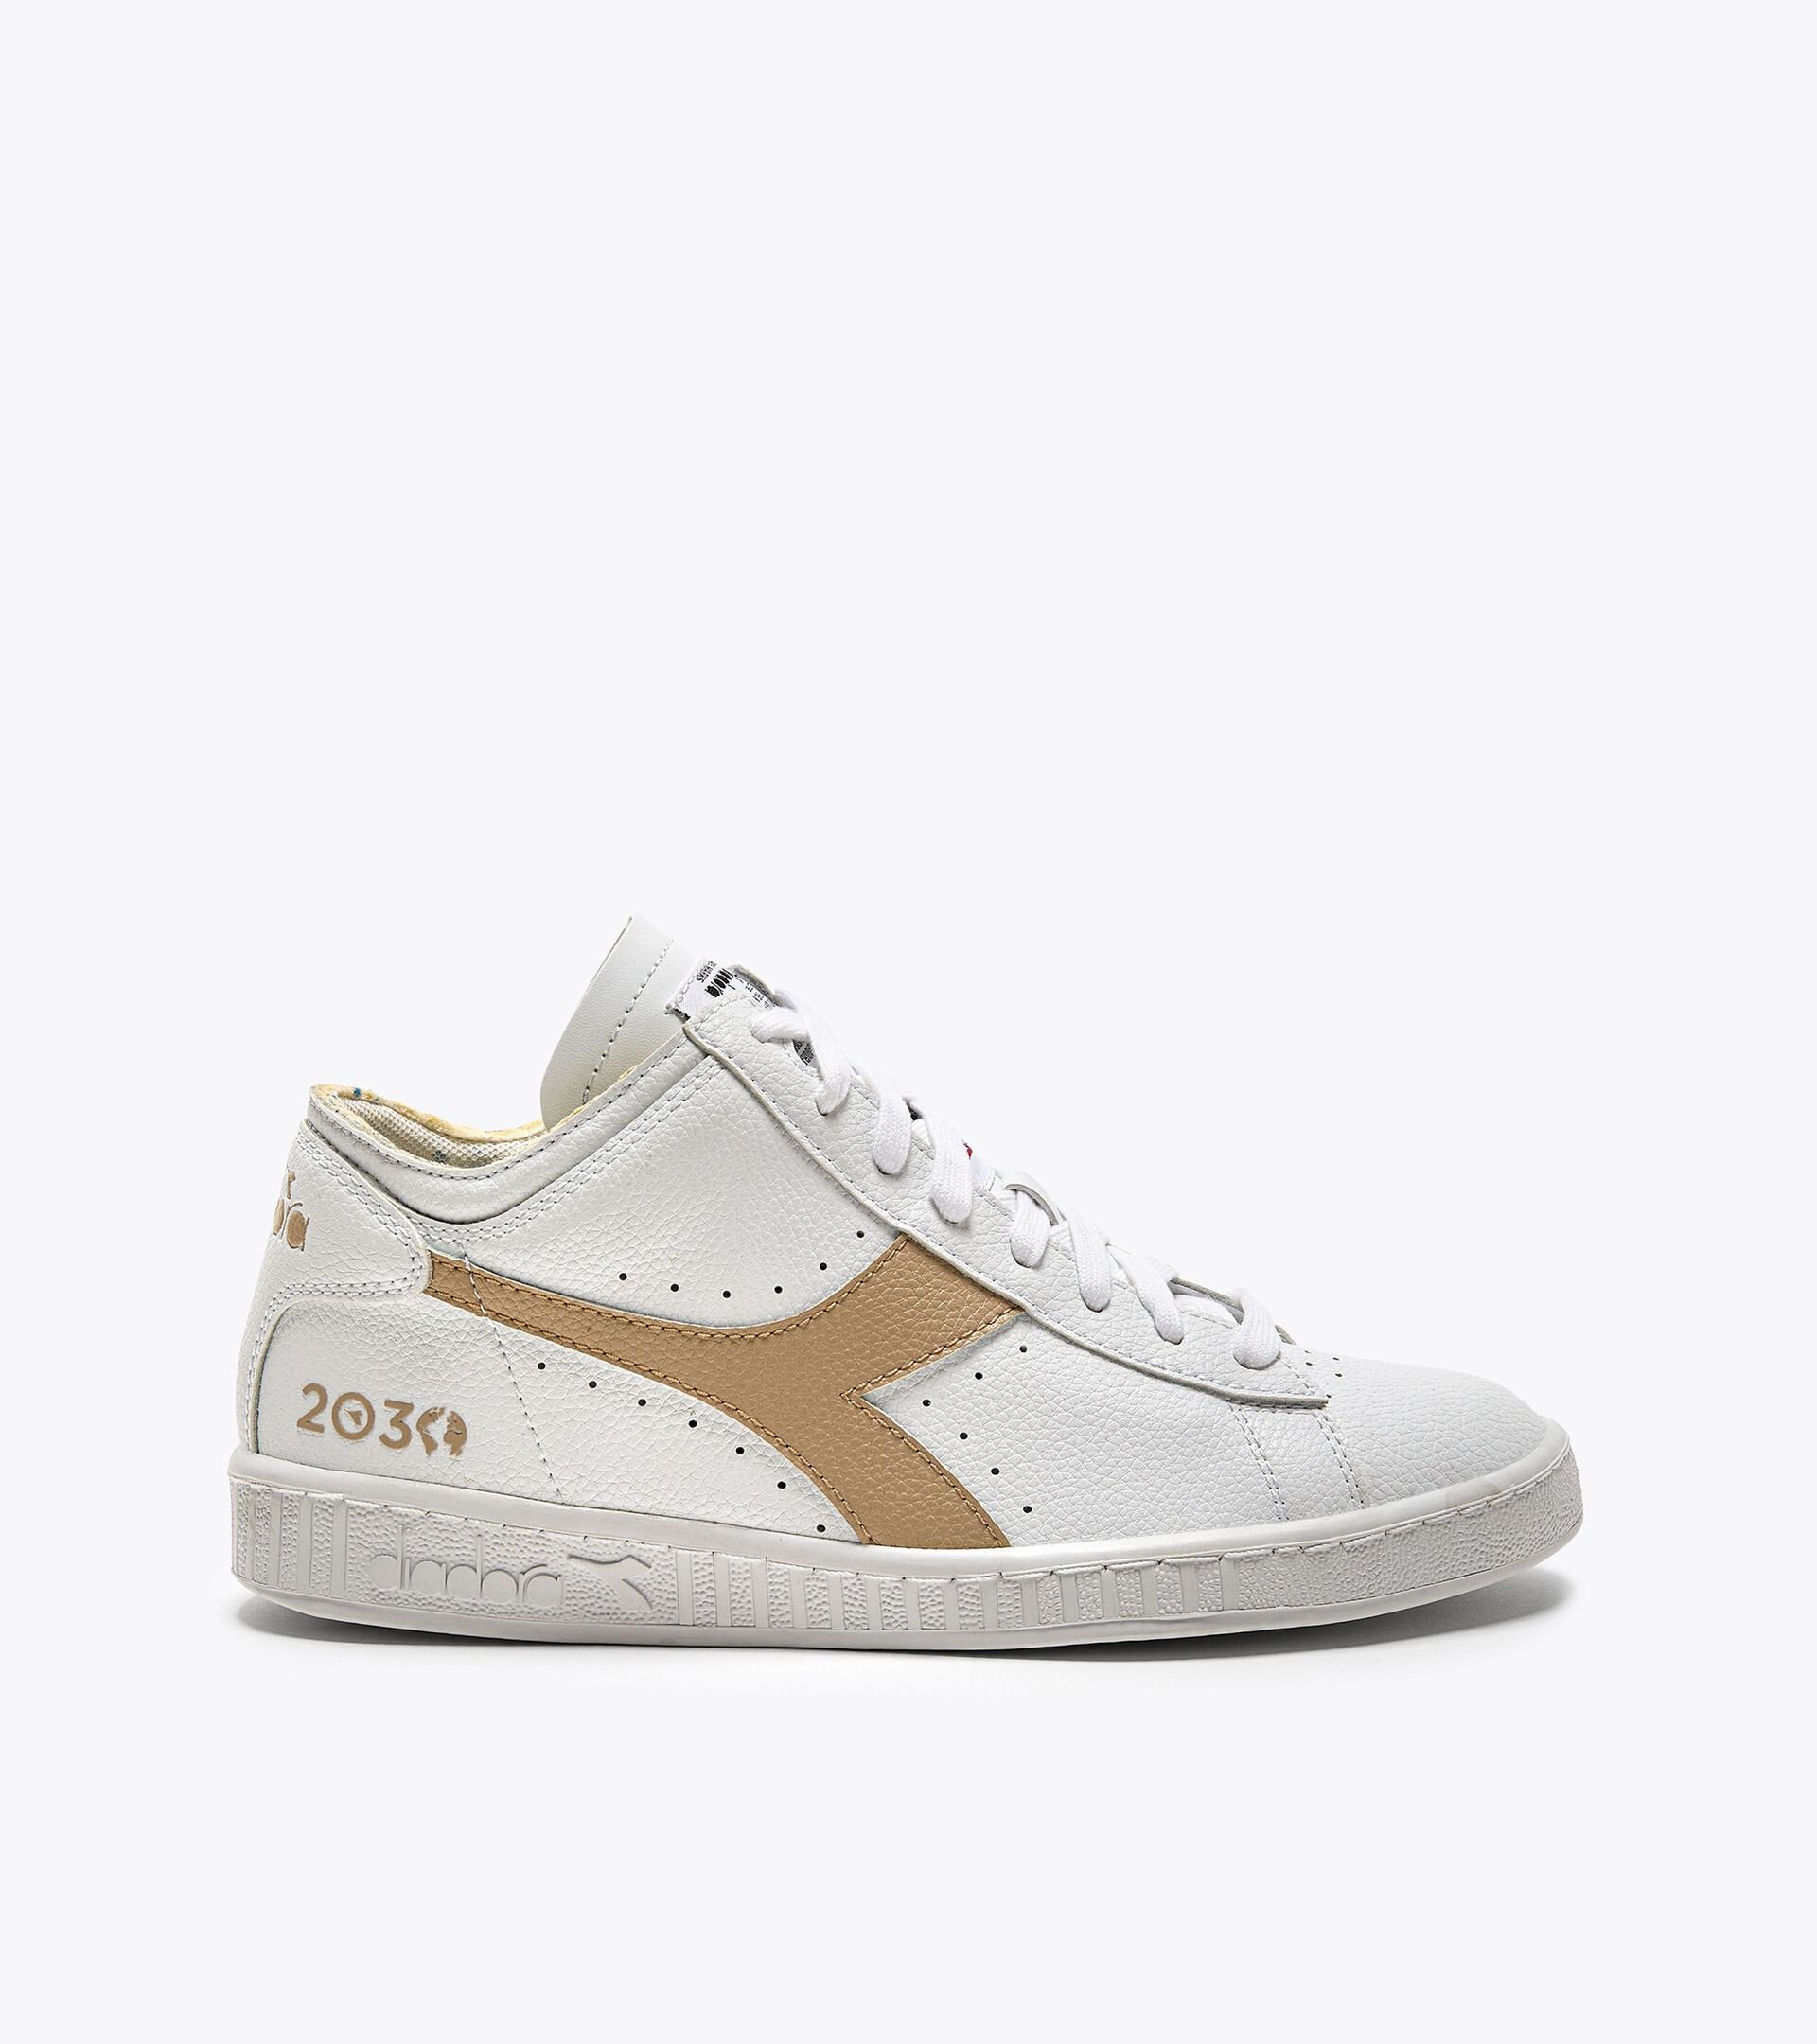 boot Omgeving schot GAME ROW CUT 2030 Sporty sneakers - Gender neutral - Diadora Online Store RS